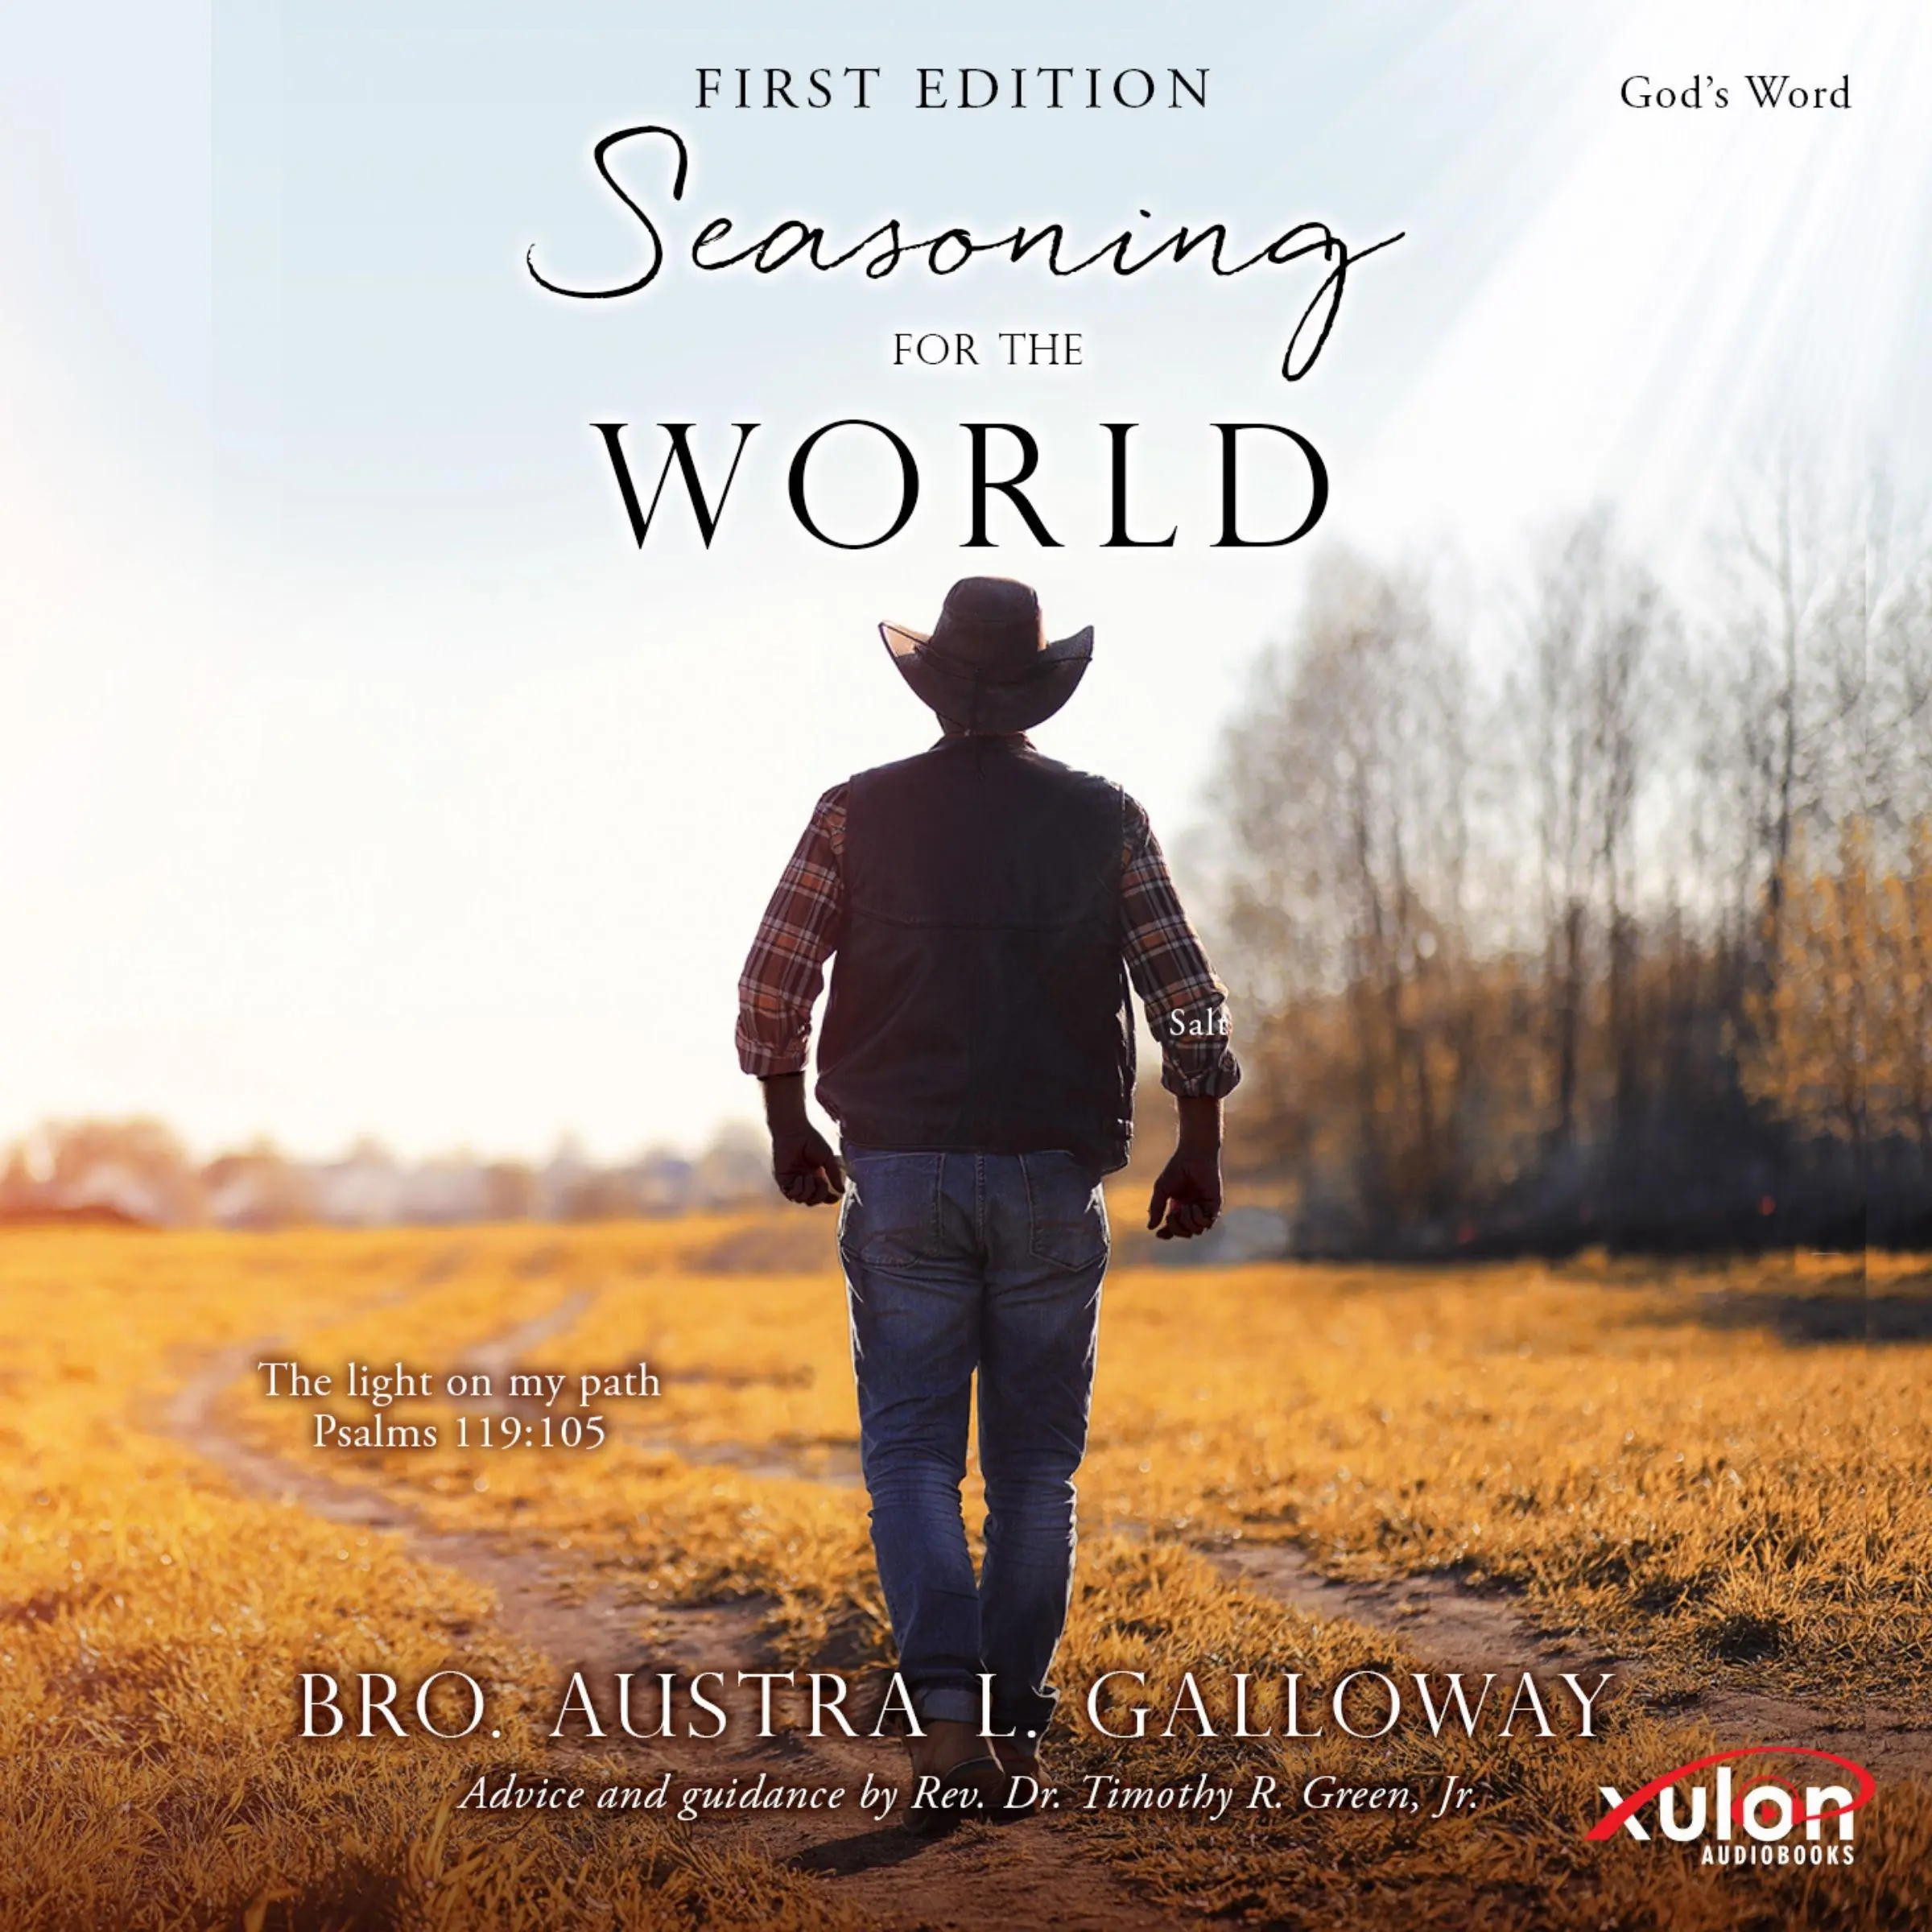 Seasoning for the World: First Edition by Bro. Austra L. Galloway Audiobook